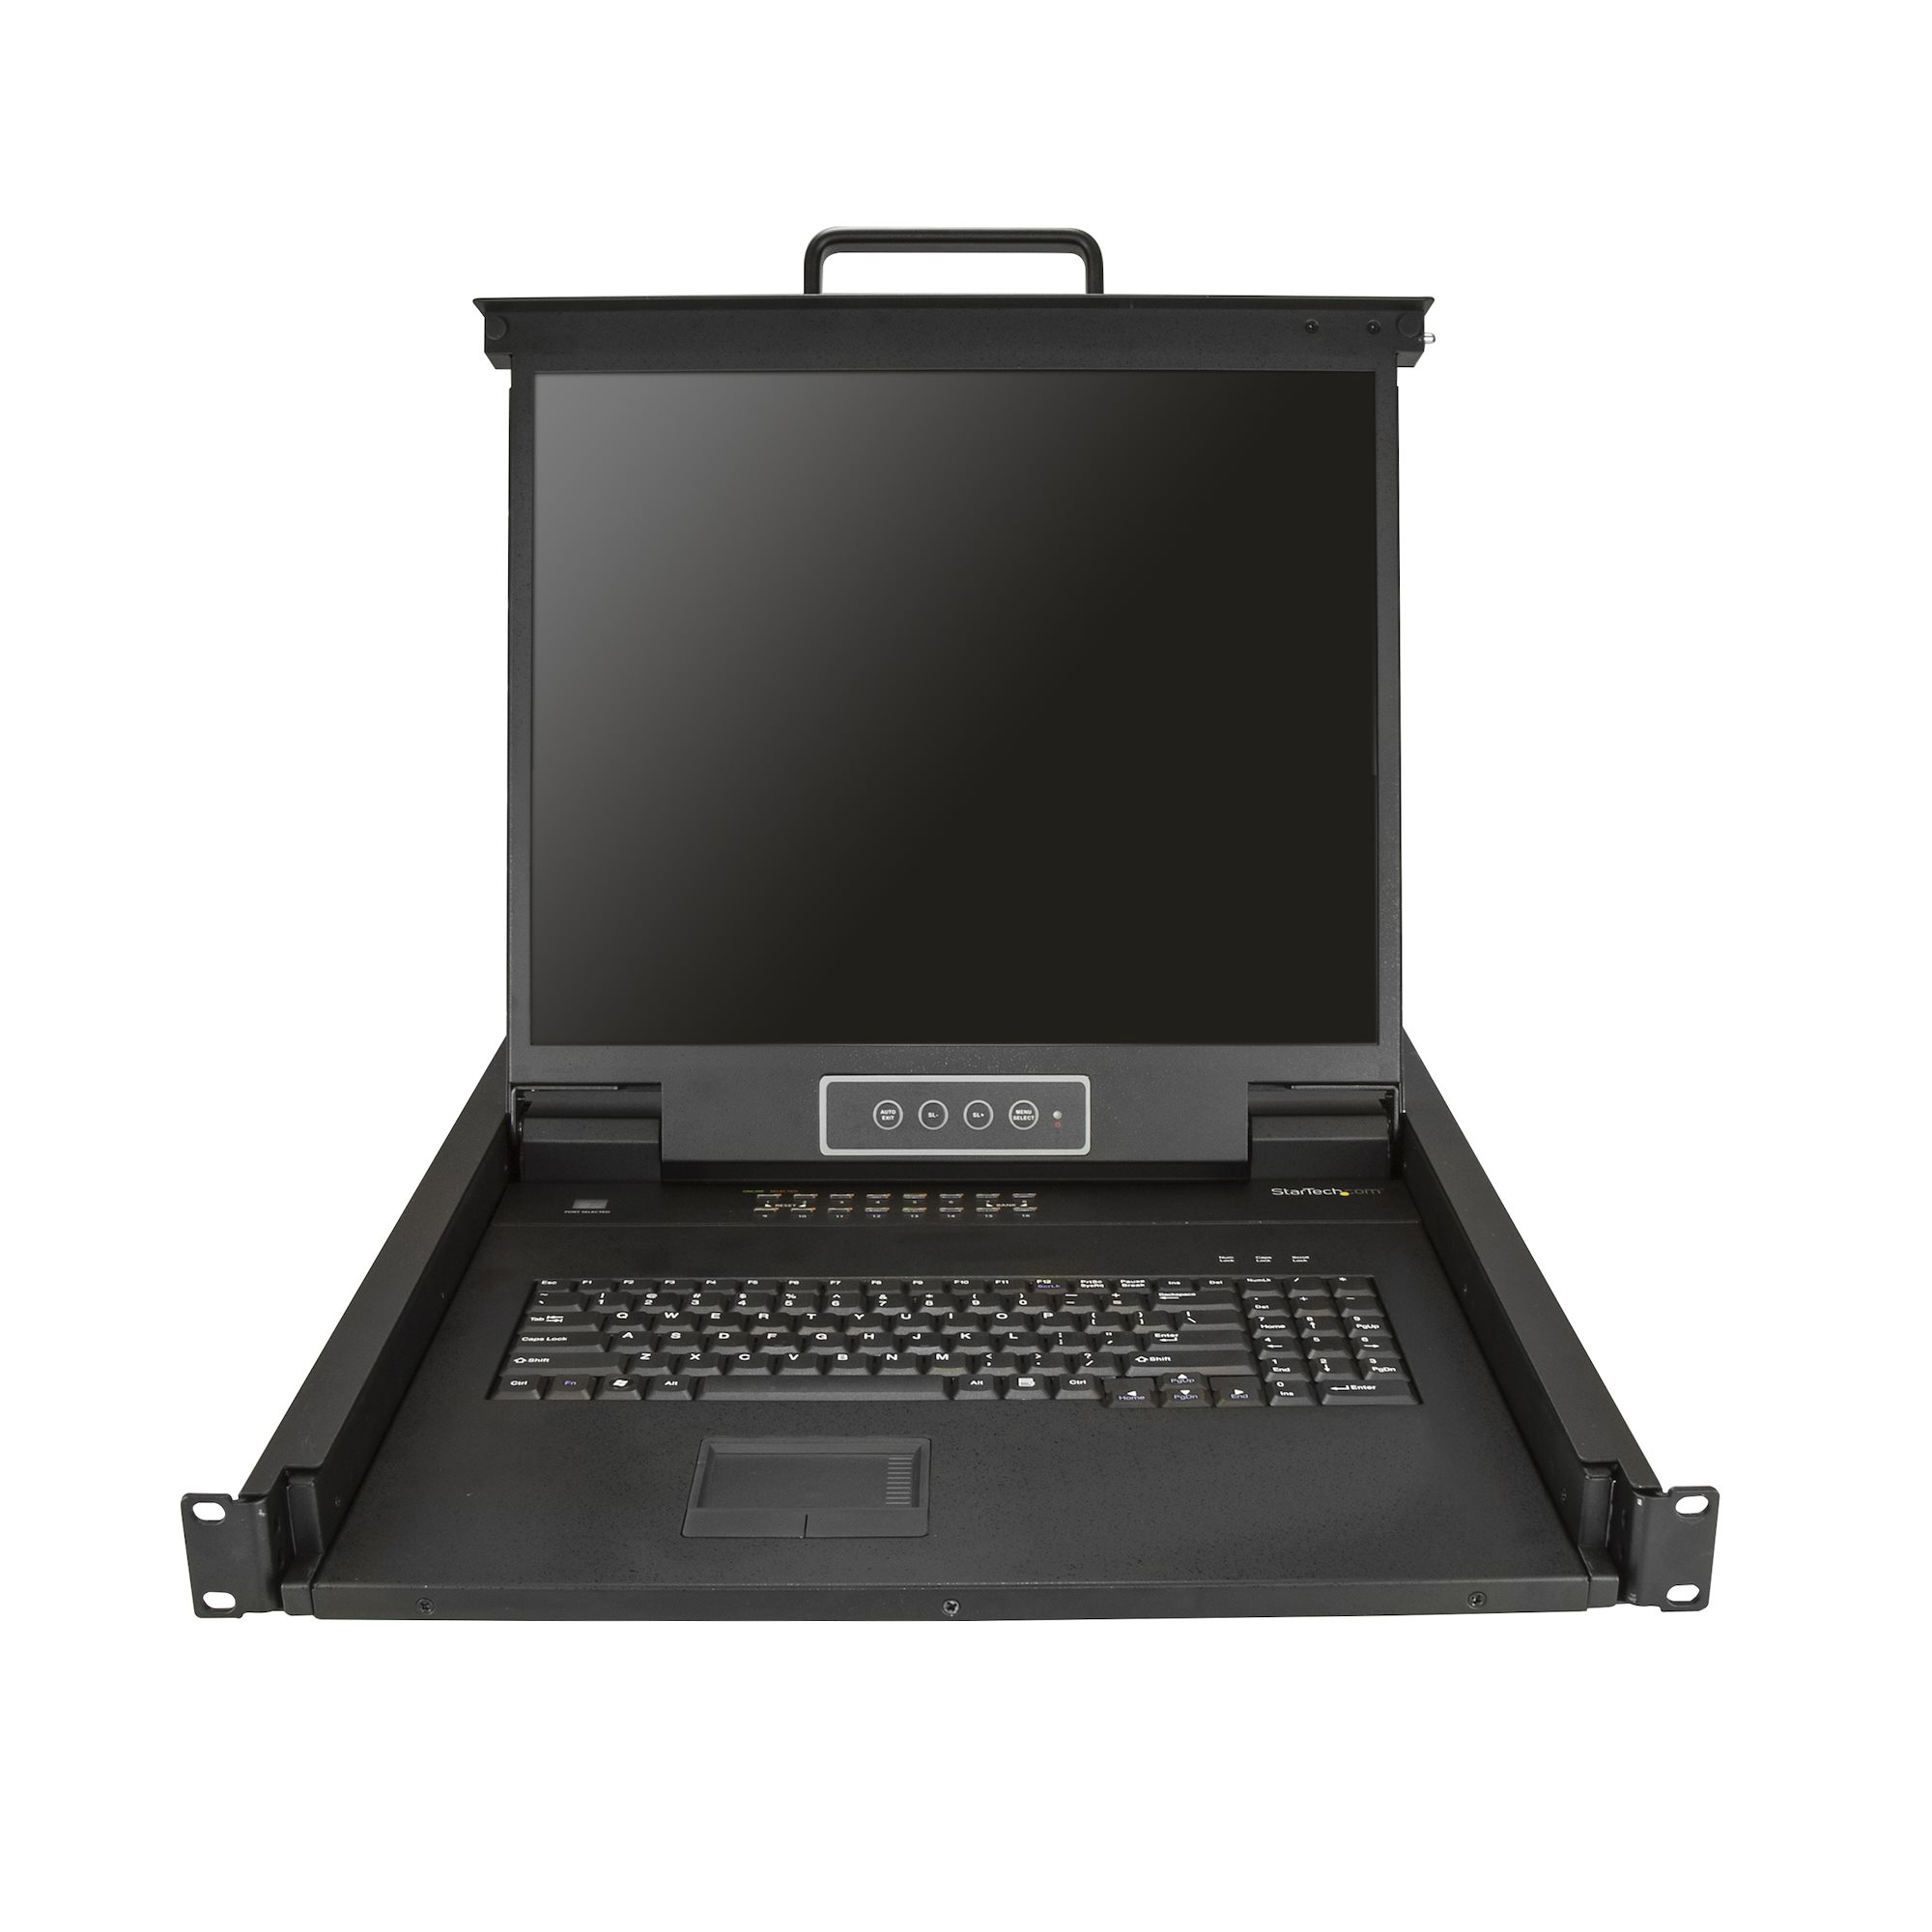 StarTech.com 16 Port Rackmount KVM Console with 6ft Cables, Integrated KVM Switch with 19" LCD Monitor, Fully Featured 1U LCD KVM Drawer- OSD KVM, Durable 50,000 MTBF, USB + VGA Support - 19in. LCD KVM Console (RKCONS1916K)